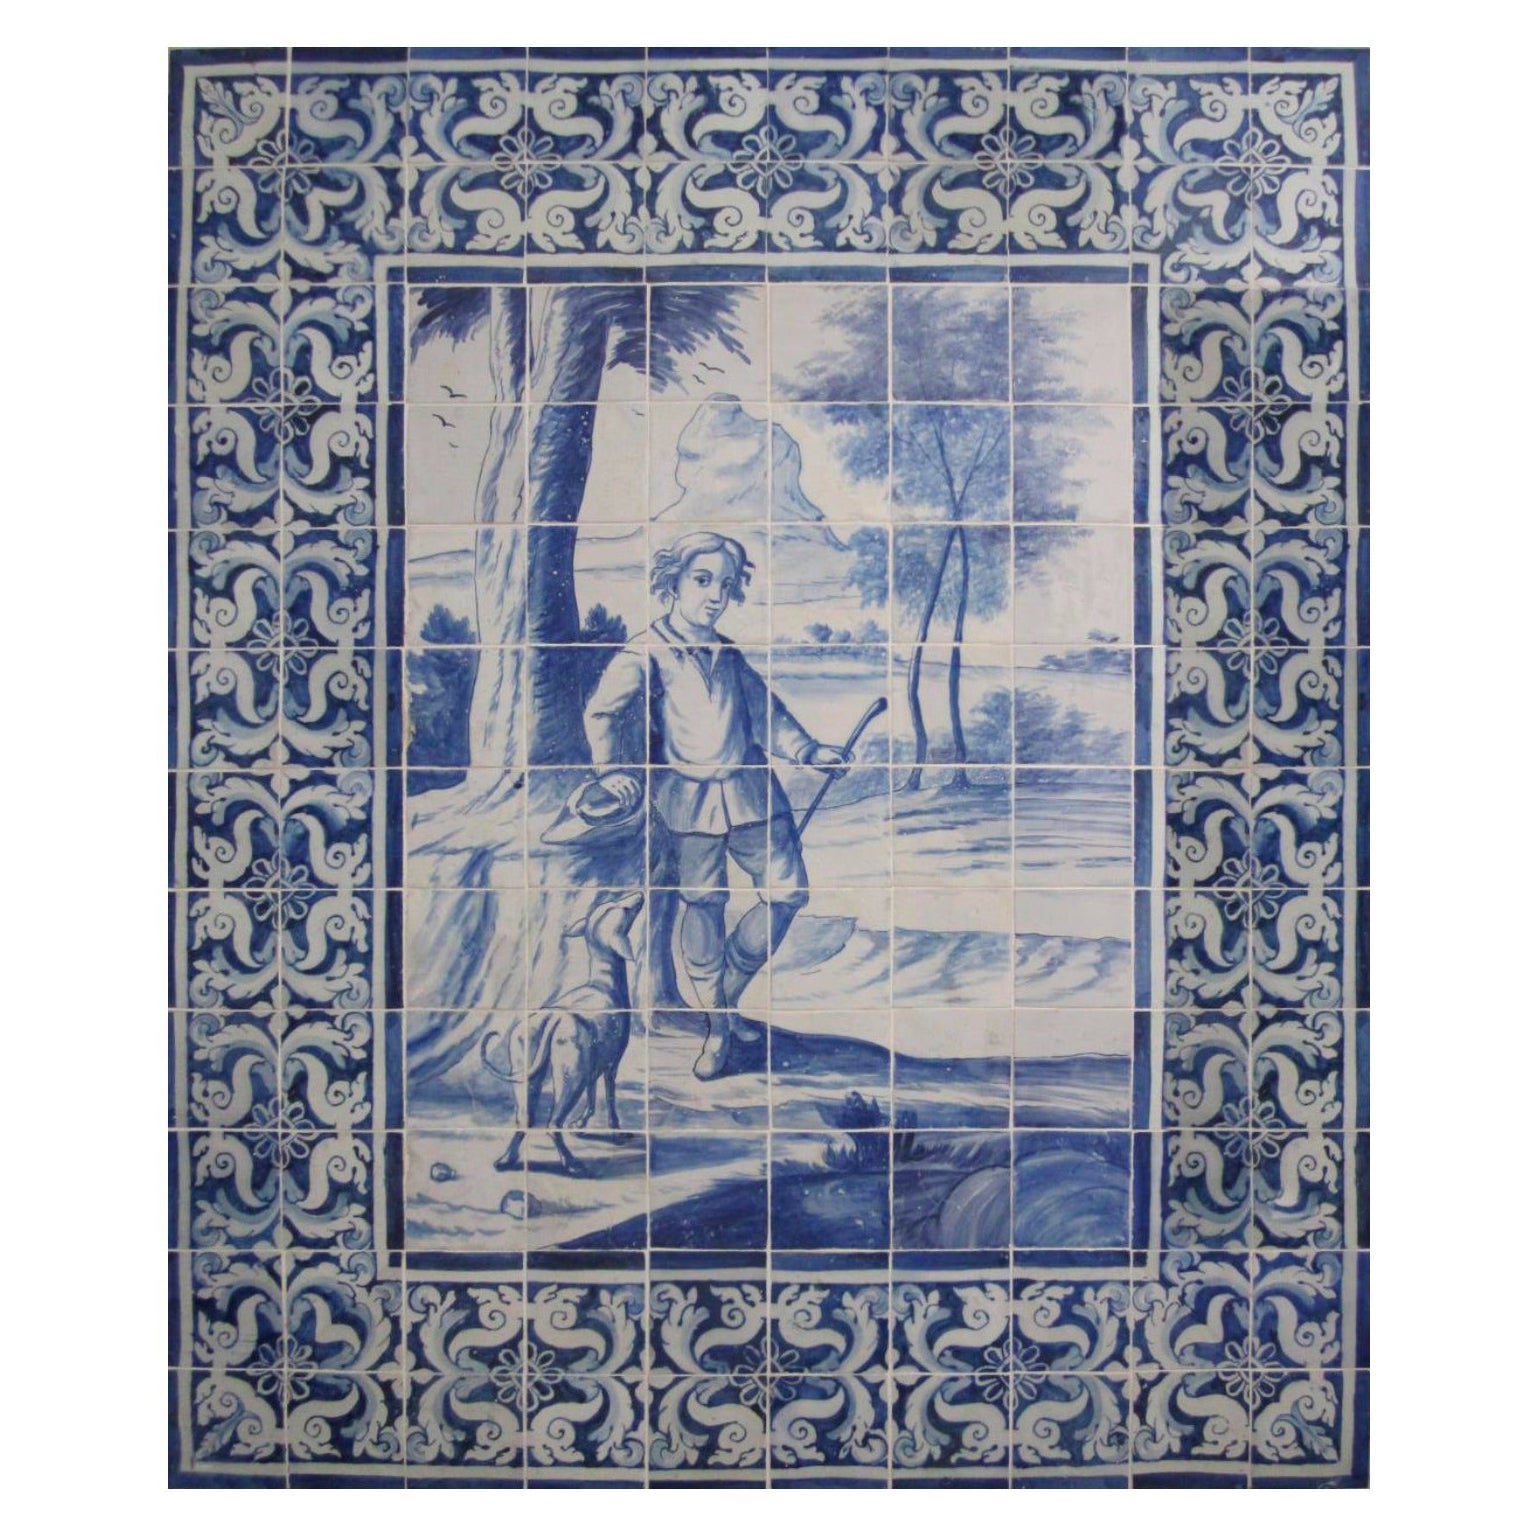 18th Century Portuguese " Azulejos " Panel "The Boy and the Dog"